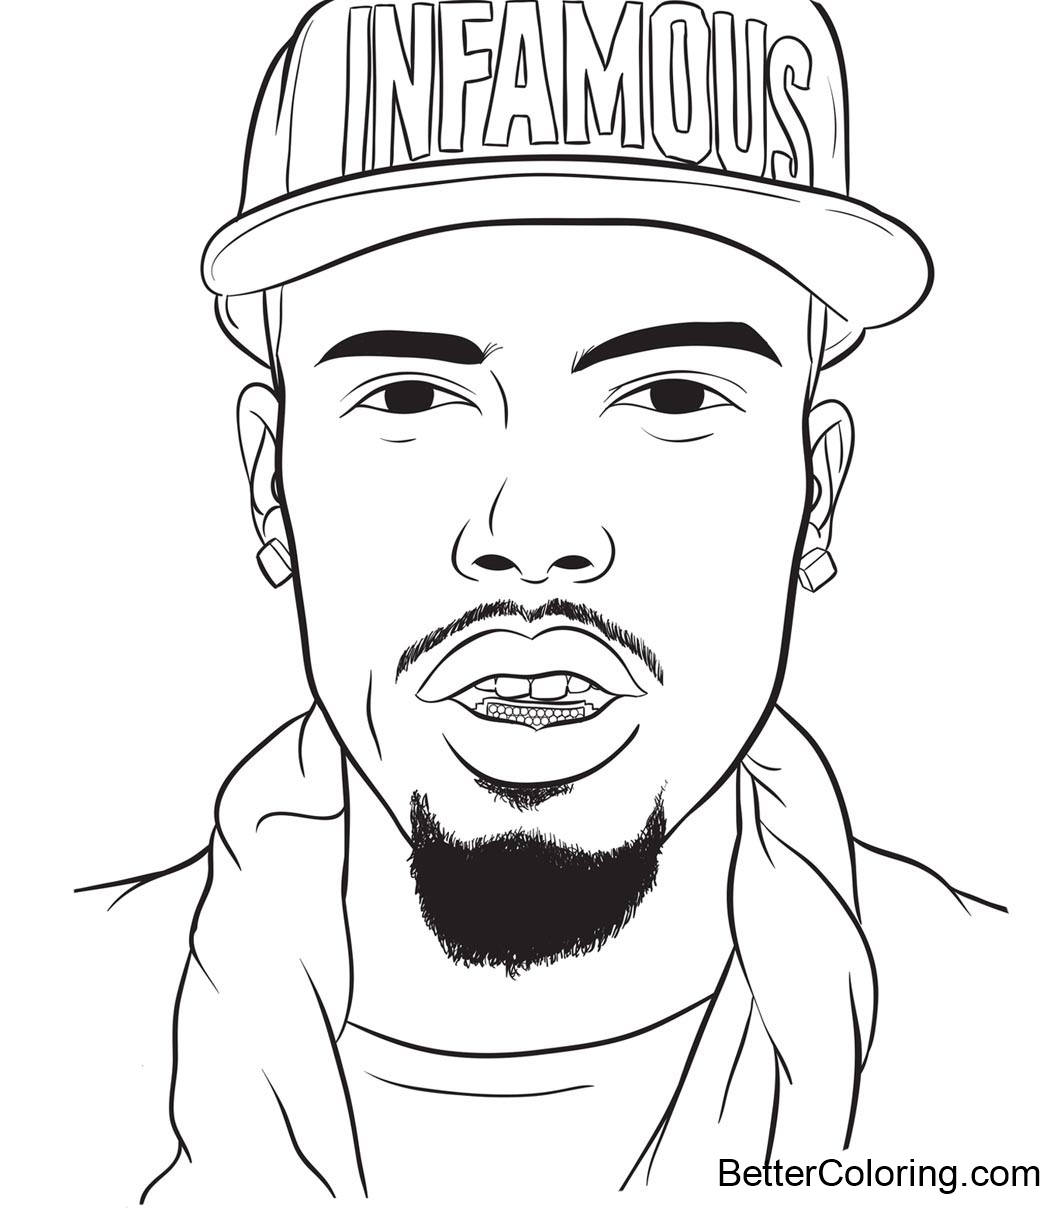 Drake Coloring Pages Fan Art - Free Printable Coloring Pages